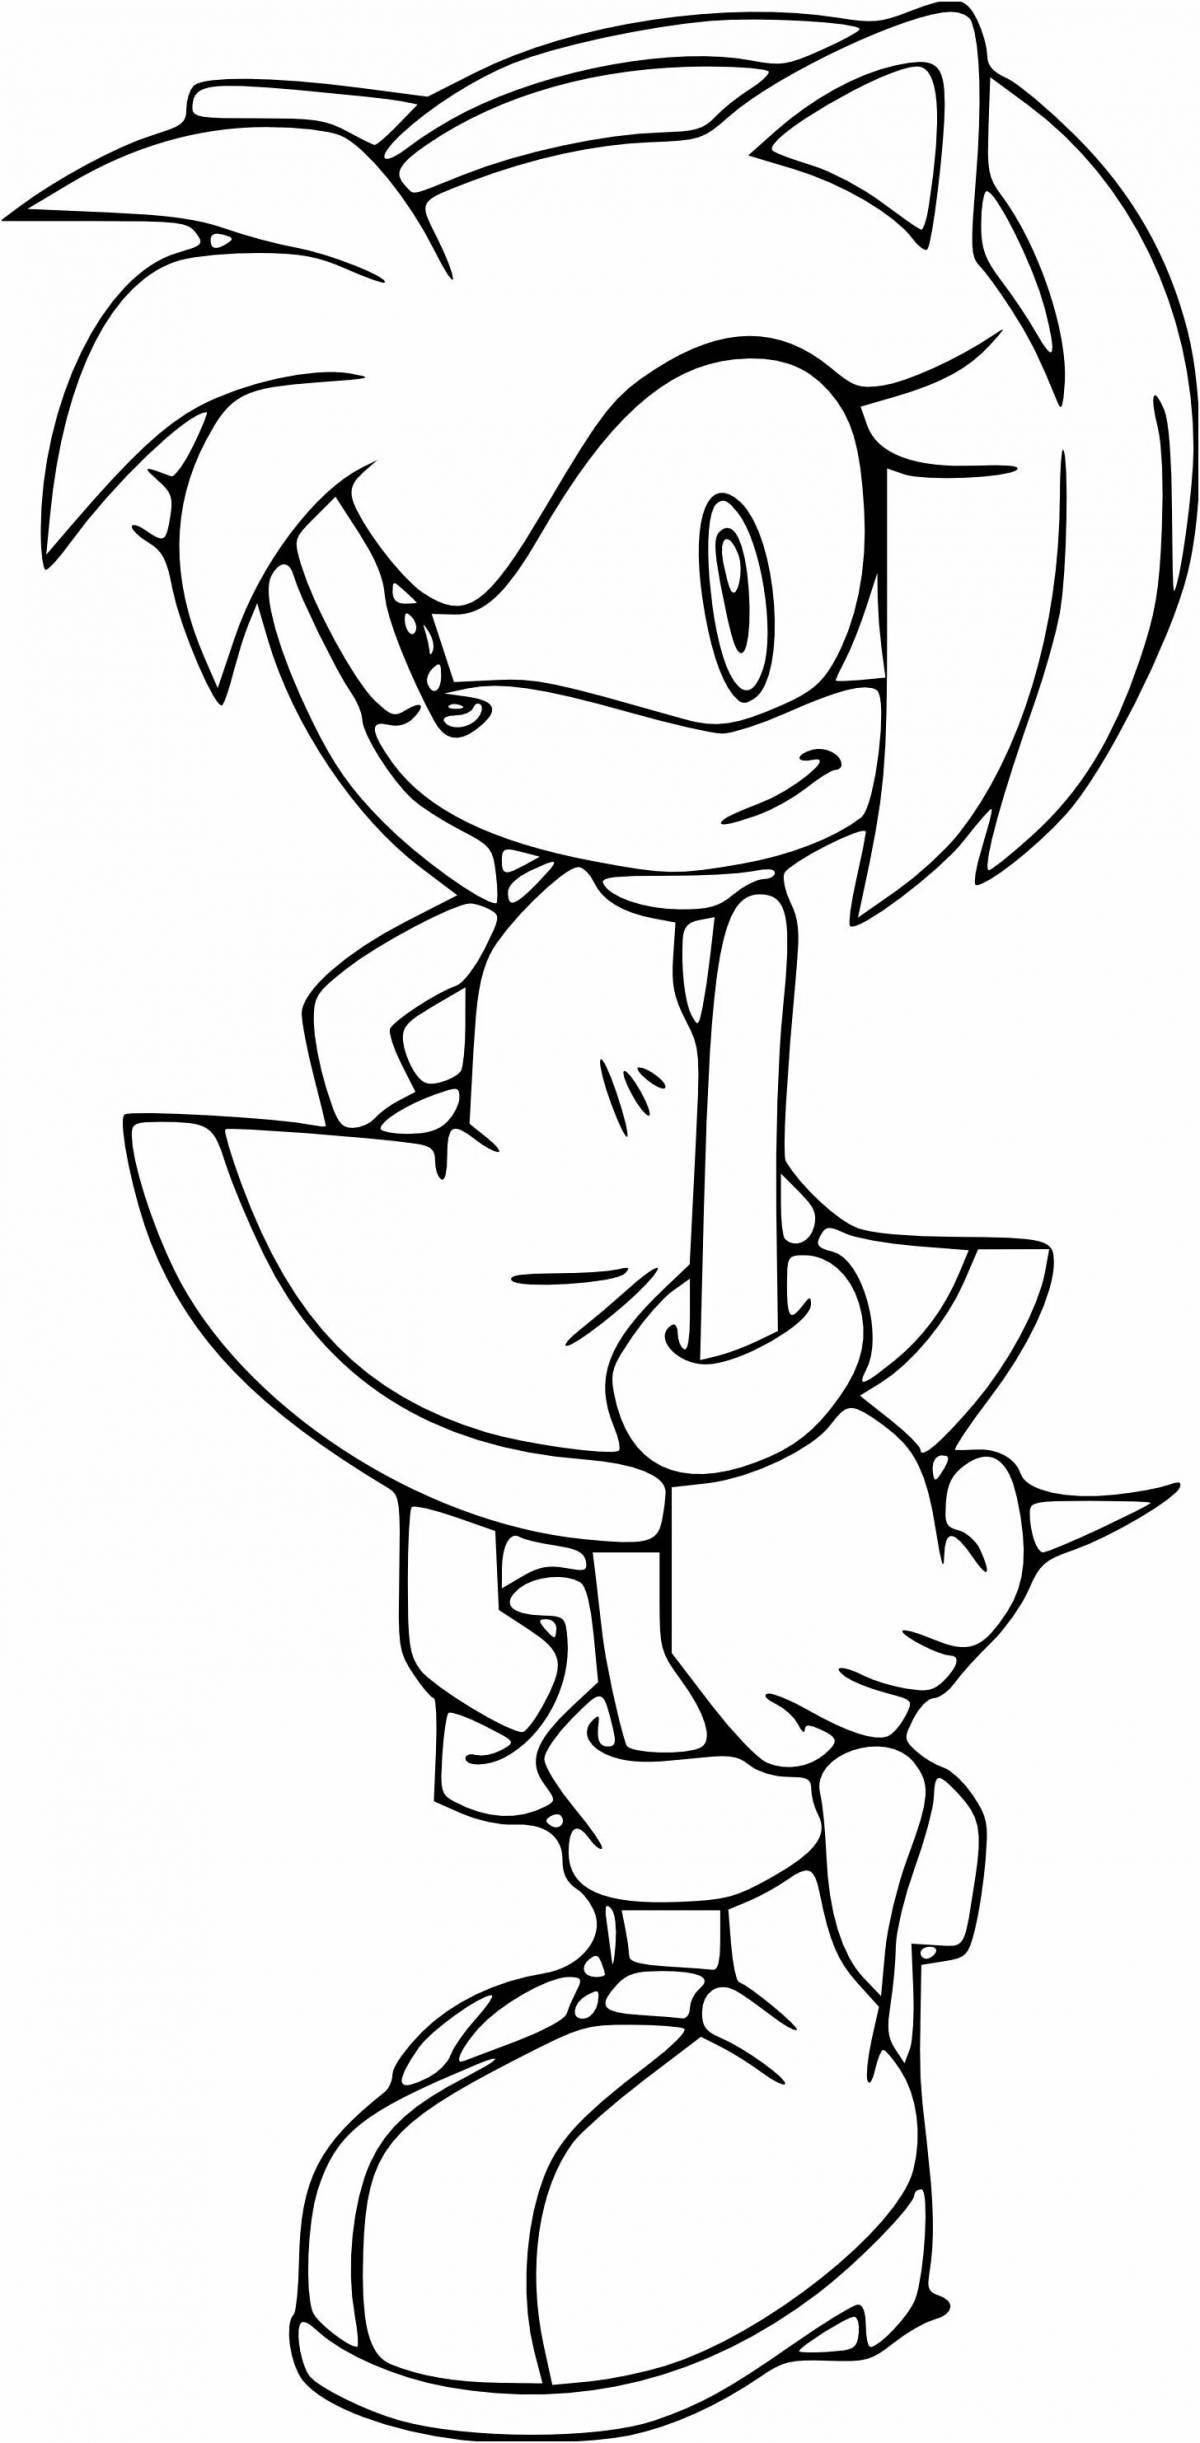 Amy's animated coloring page